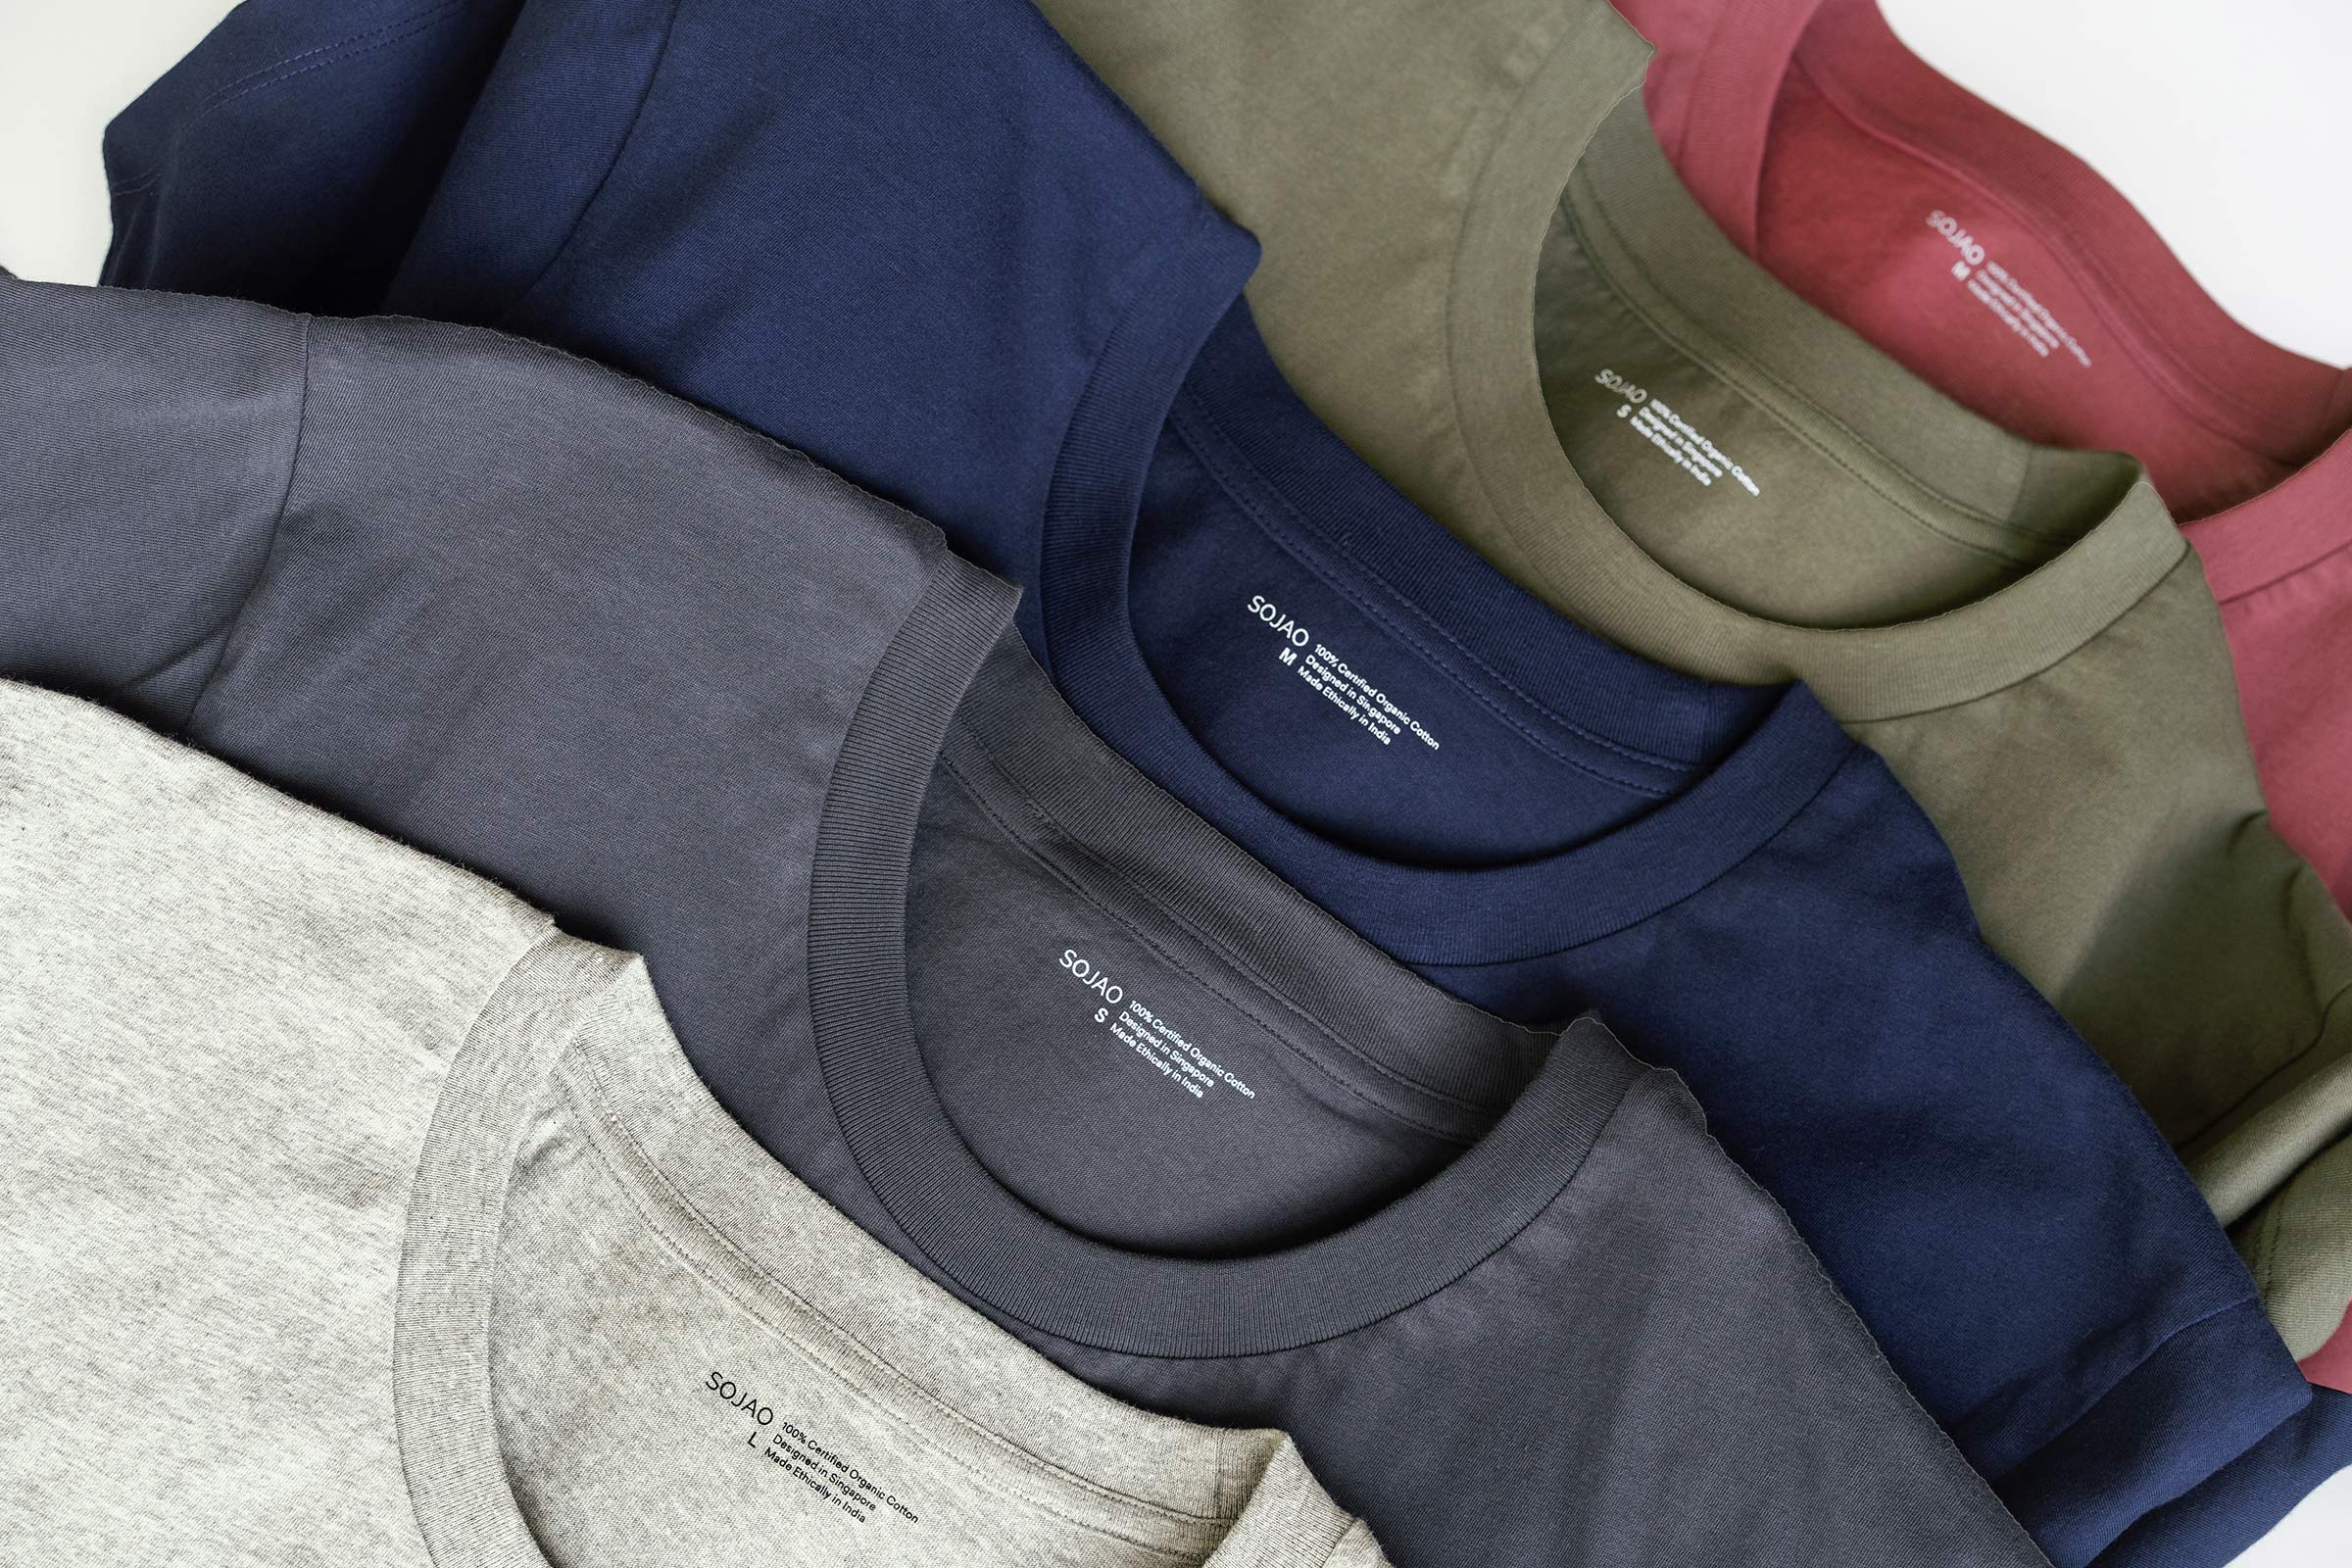 pebble-midnight-navy-olive-rouge-organic-cotton-mens-tee-close-up-shot-by-sojao.jpg